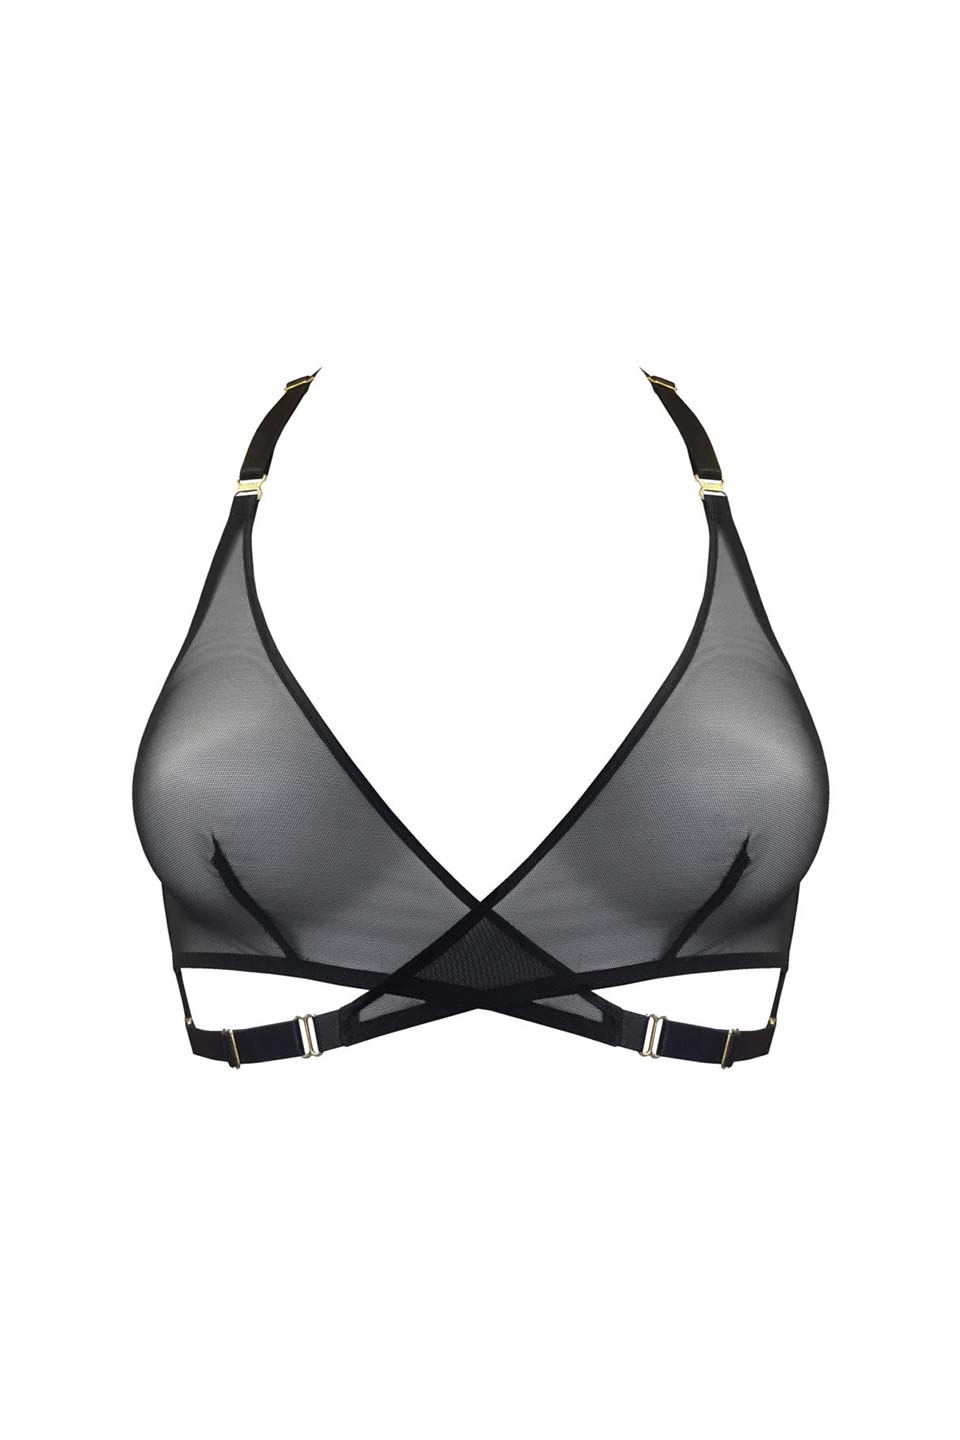 Thumbnail for Product gallery 1, Atelier Bordelle Art Deco Bra in black color front view